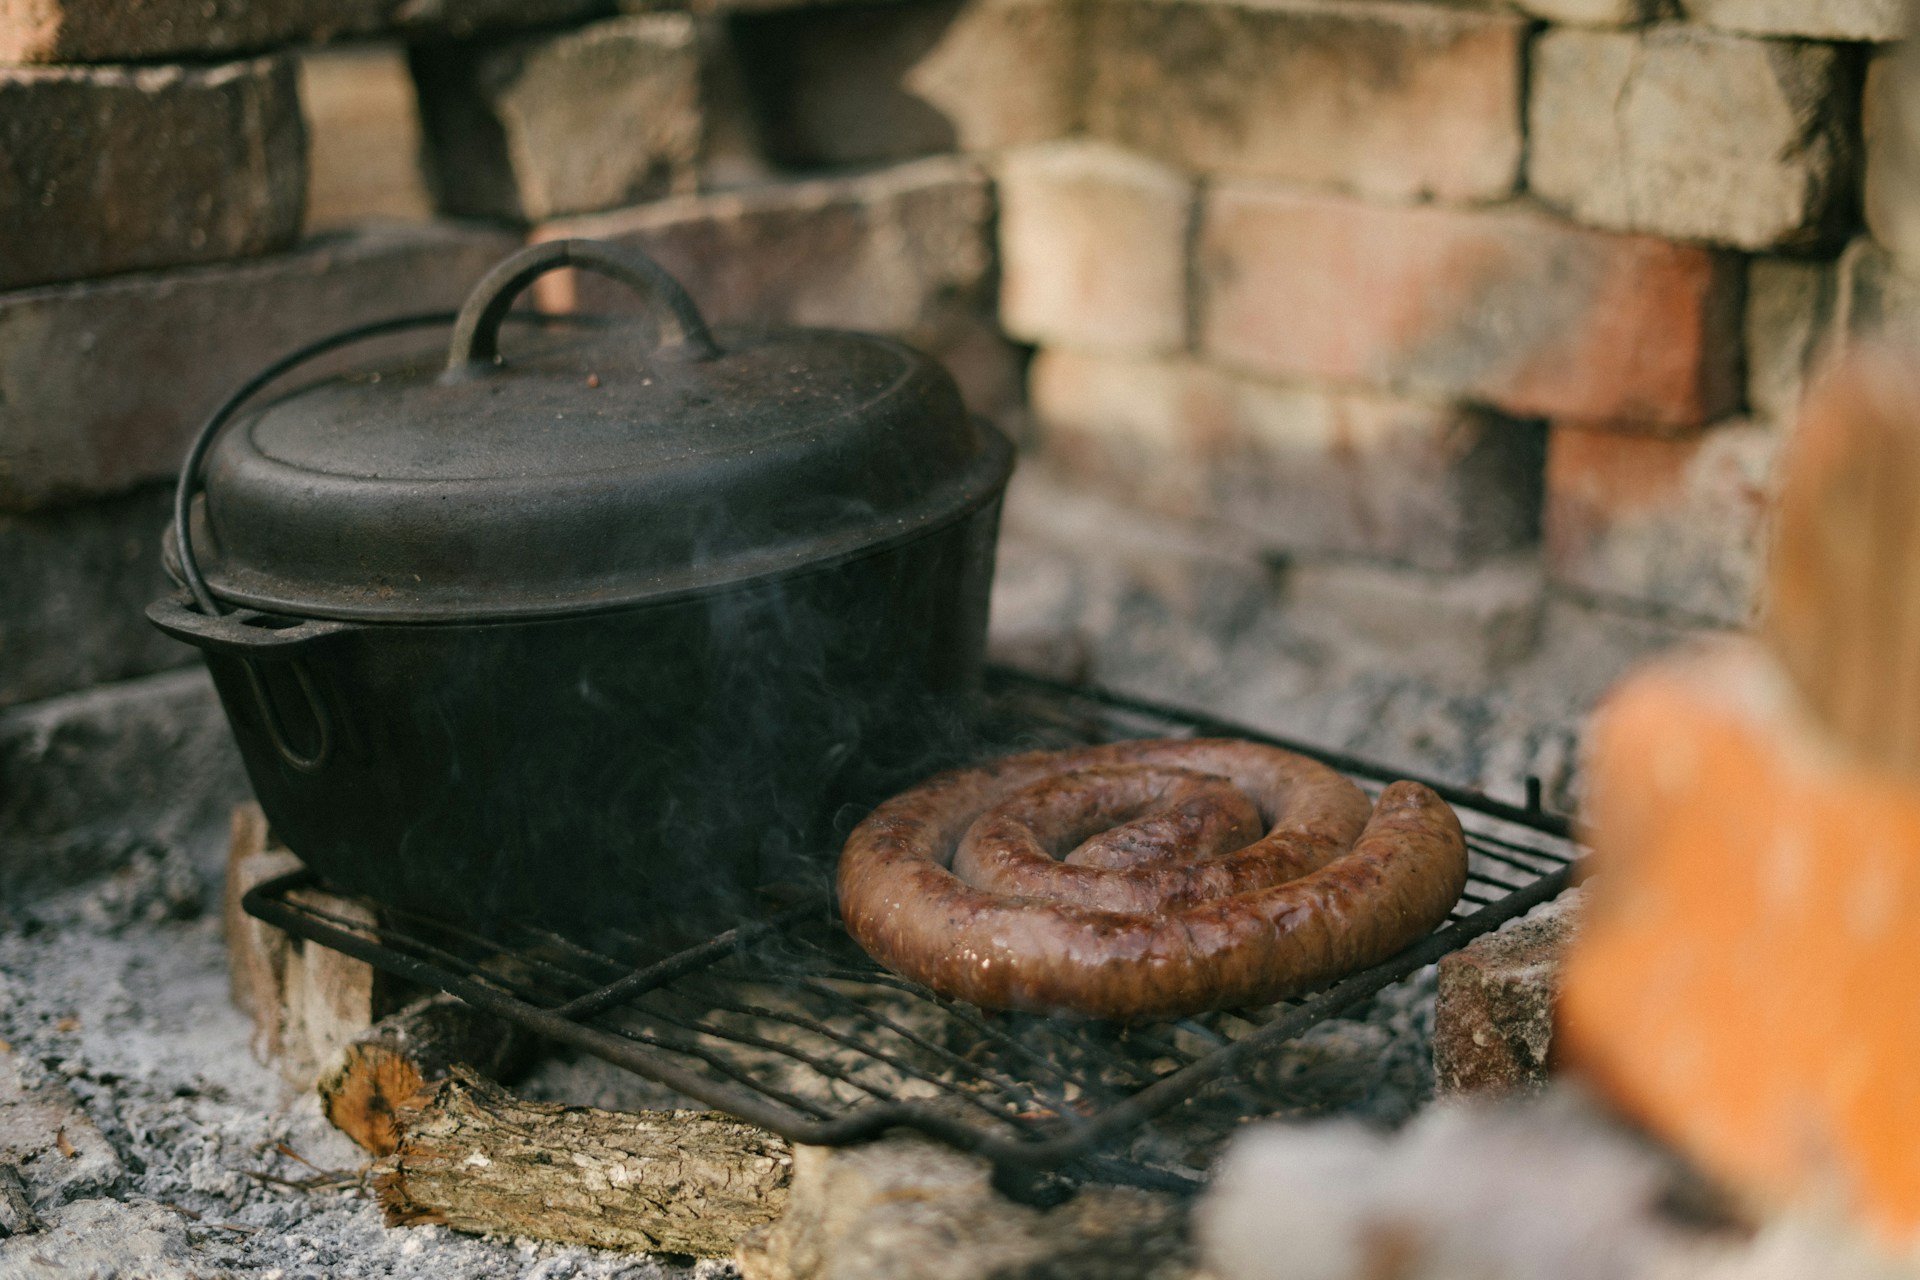 A Dutch oven is perfect for making stews, so make sure you bring one along on your camping trip! All you need to do is throw some ingredients in and the fire will do the cooking for you. For an easy but tasty dinner meal, combine some meat, potatoes, carrots, onions, and some broth. Just let it simmer slowly and watch your meal meld together beautifully.